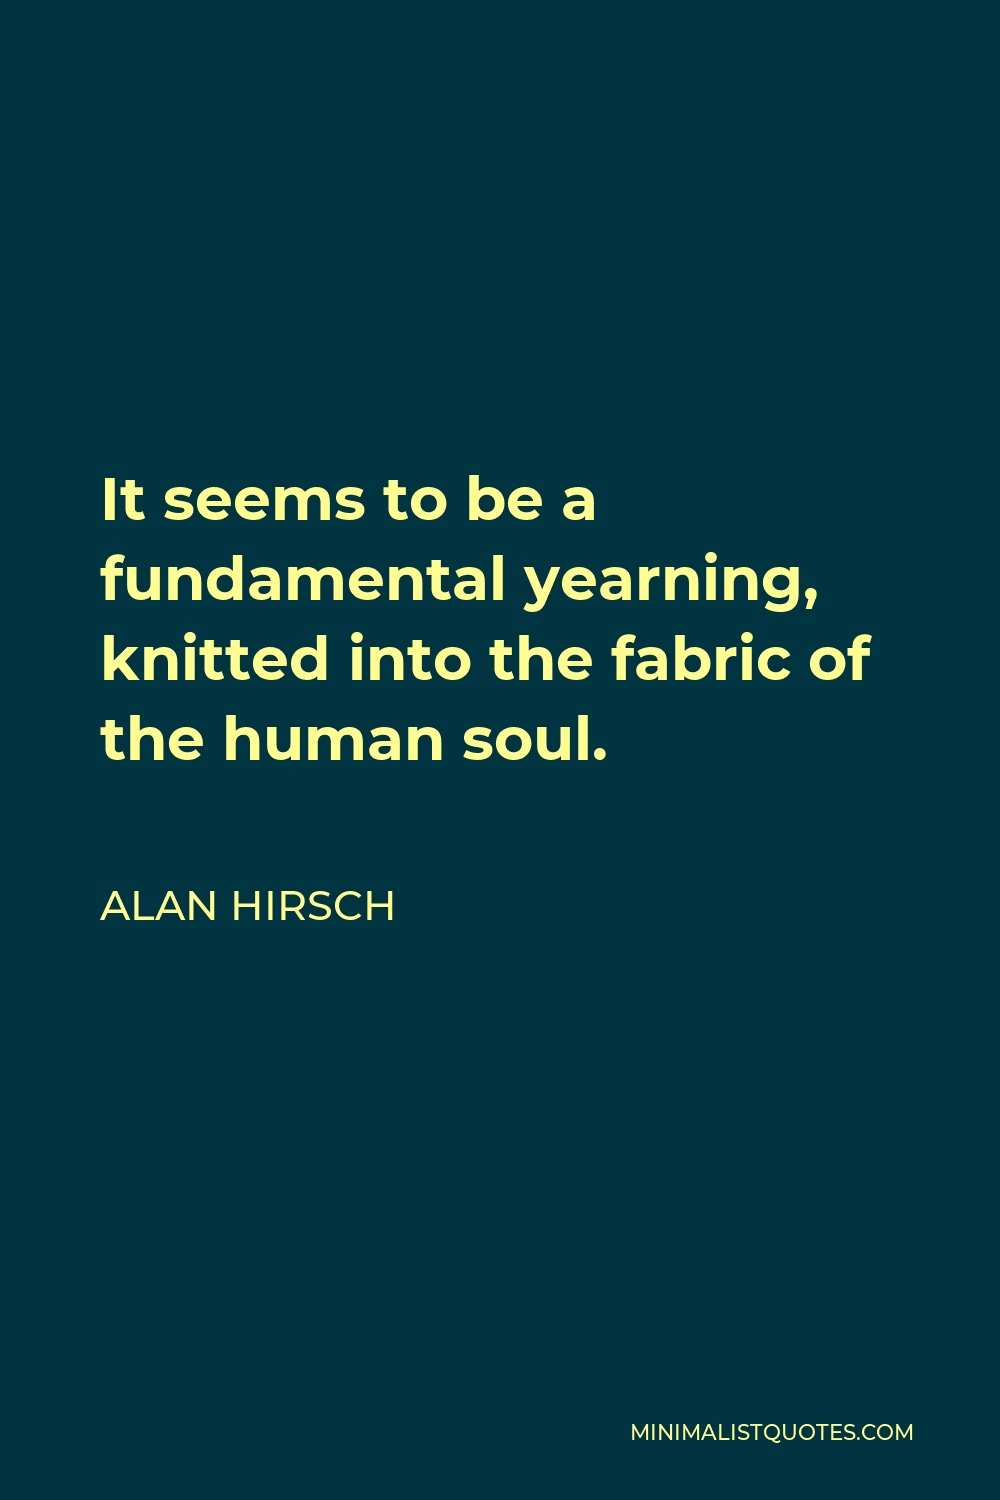 Alan Hirsch Quote - It seems to be a fundamental yearning, knitted into the fabric of the human soul.